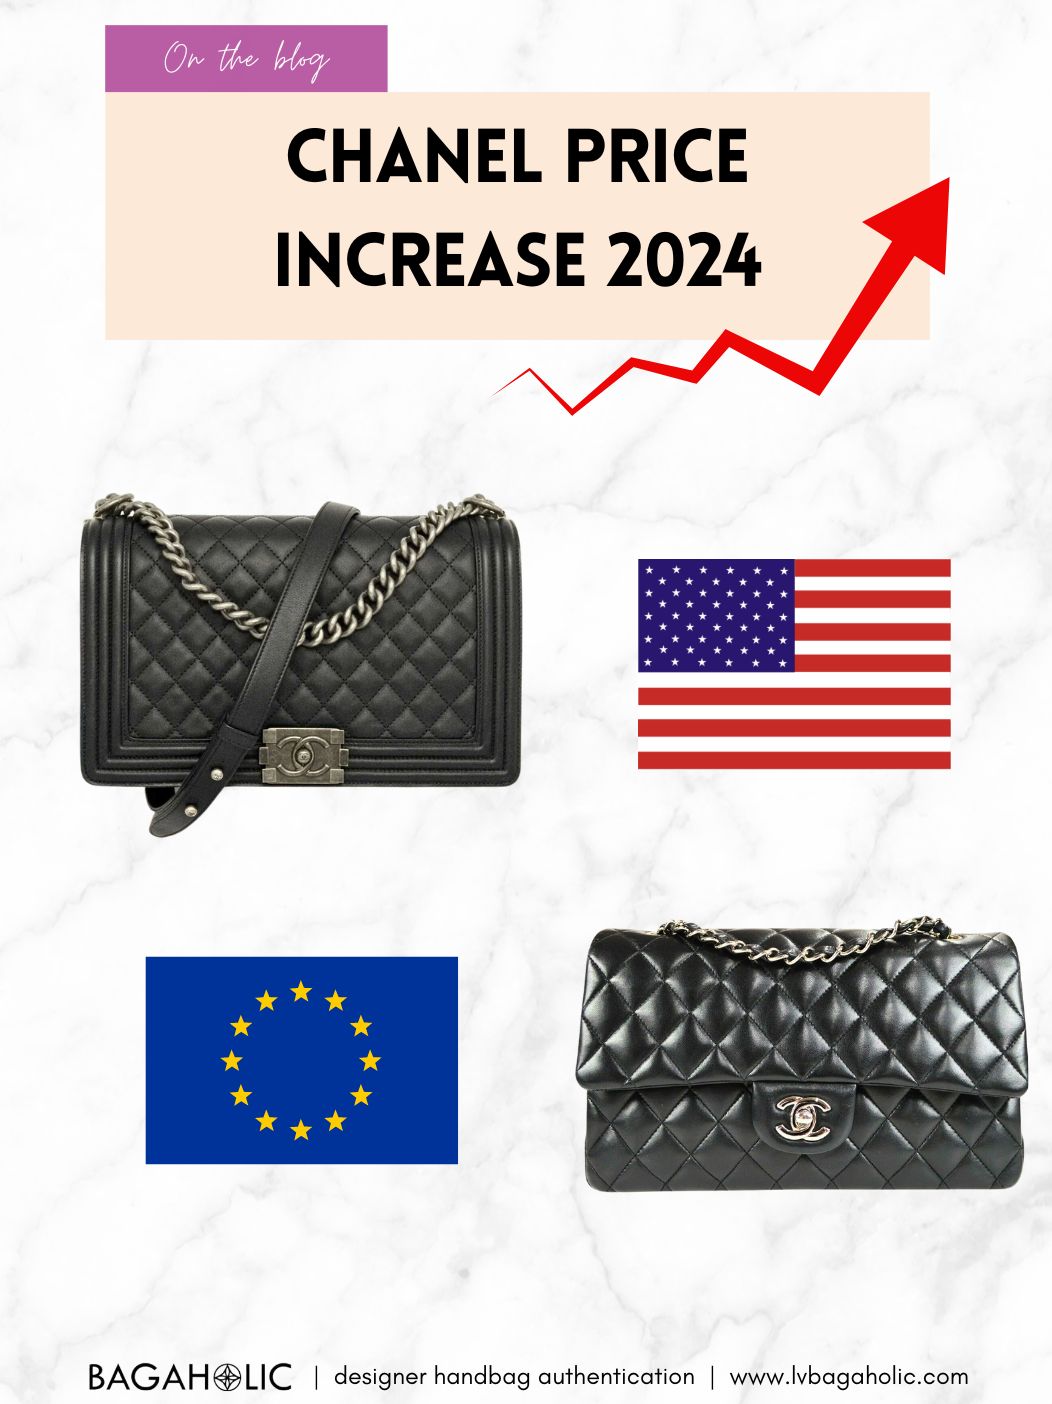 Chanel is Increasing Their Prices, Again (2024): US vs EU